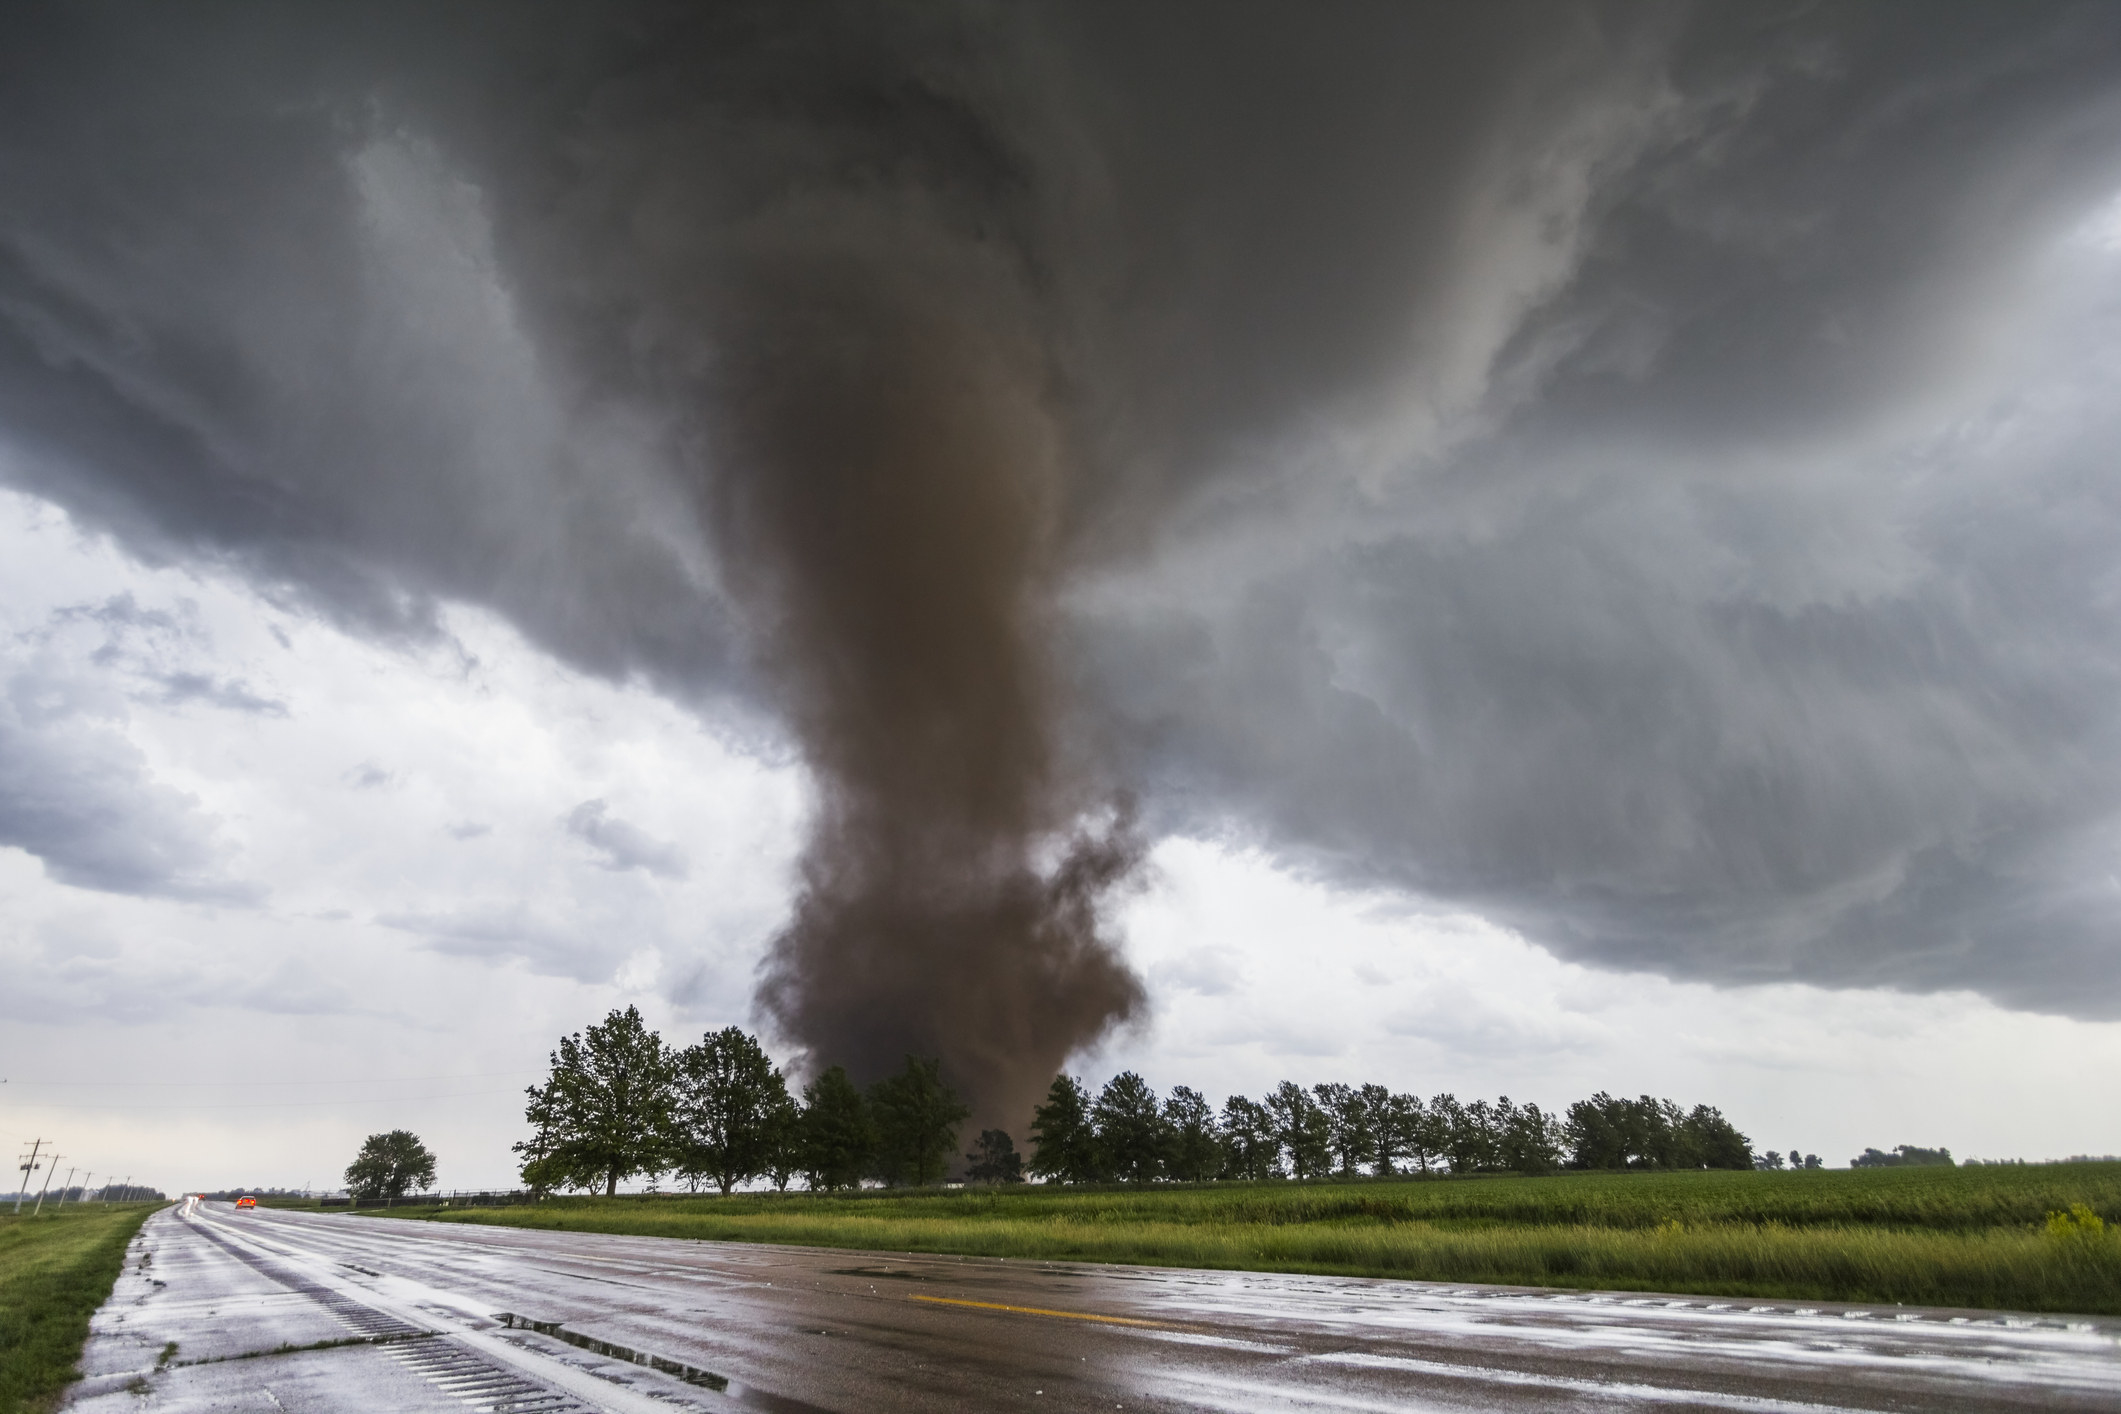 A large tornado approaches a field